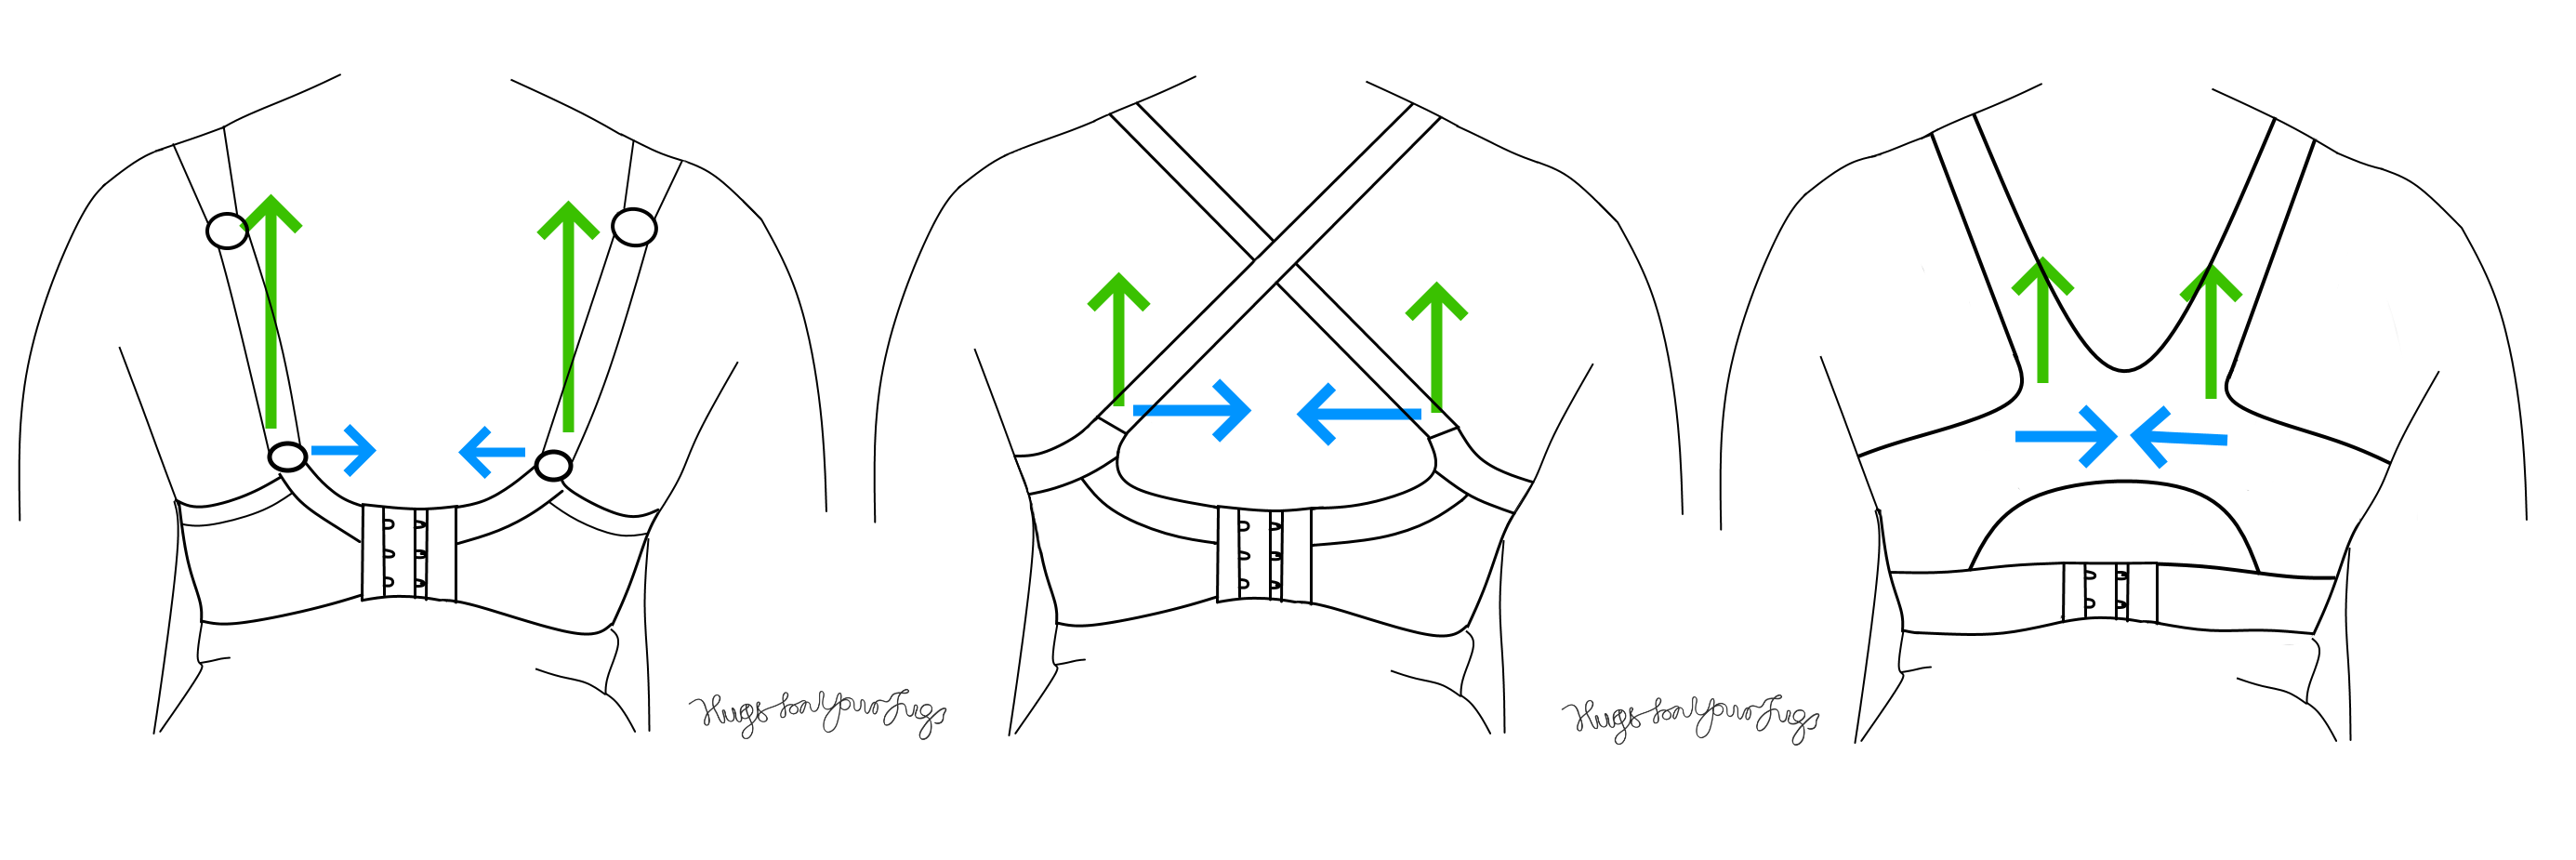 Diagram showing how different strap orientations have different vertical and horizontal force components